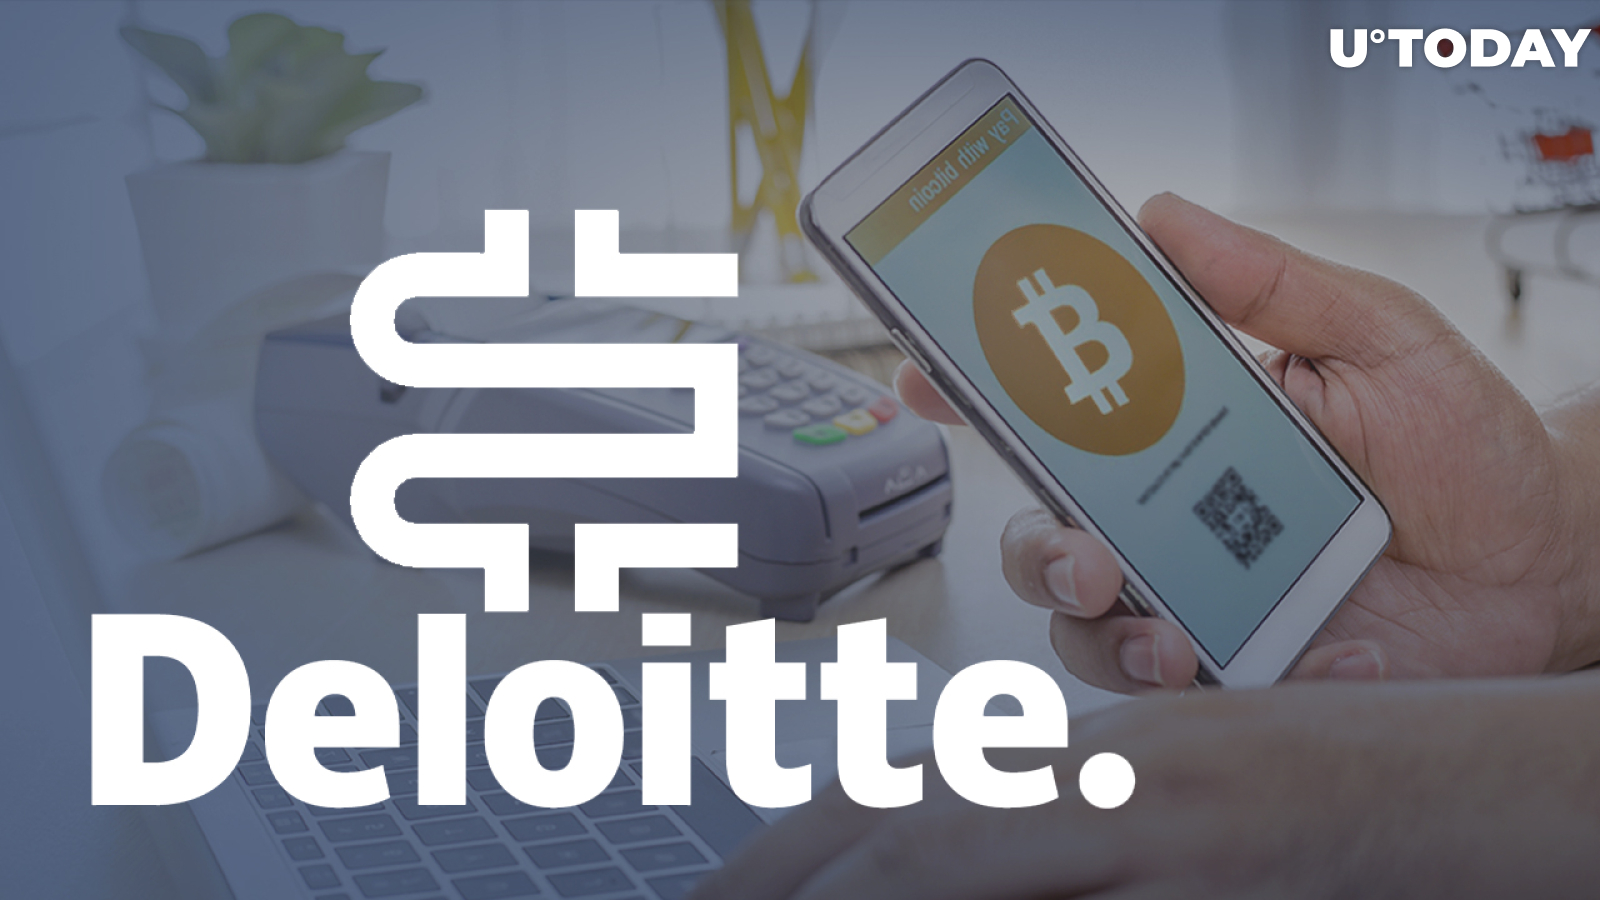 Deloitte and NYDIG to Help Companies Integrate Bitcoin-Related Products, Including Banking